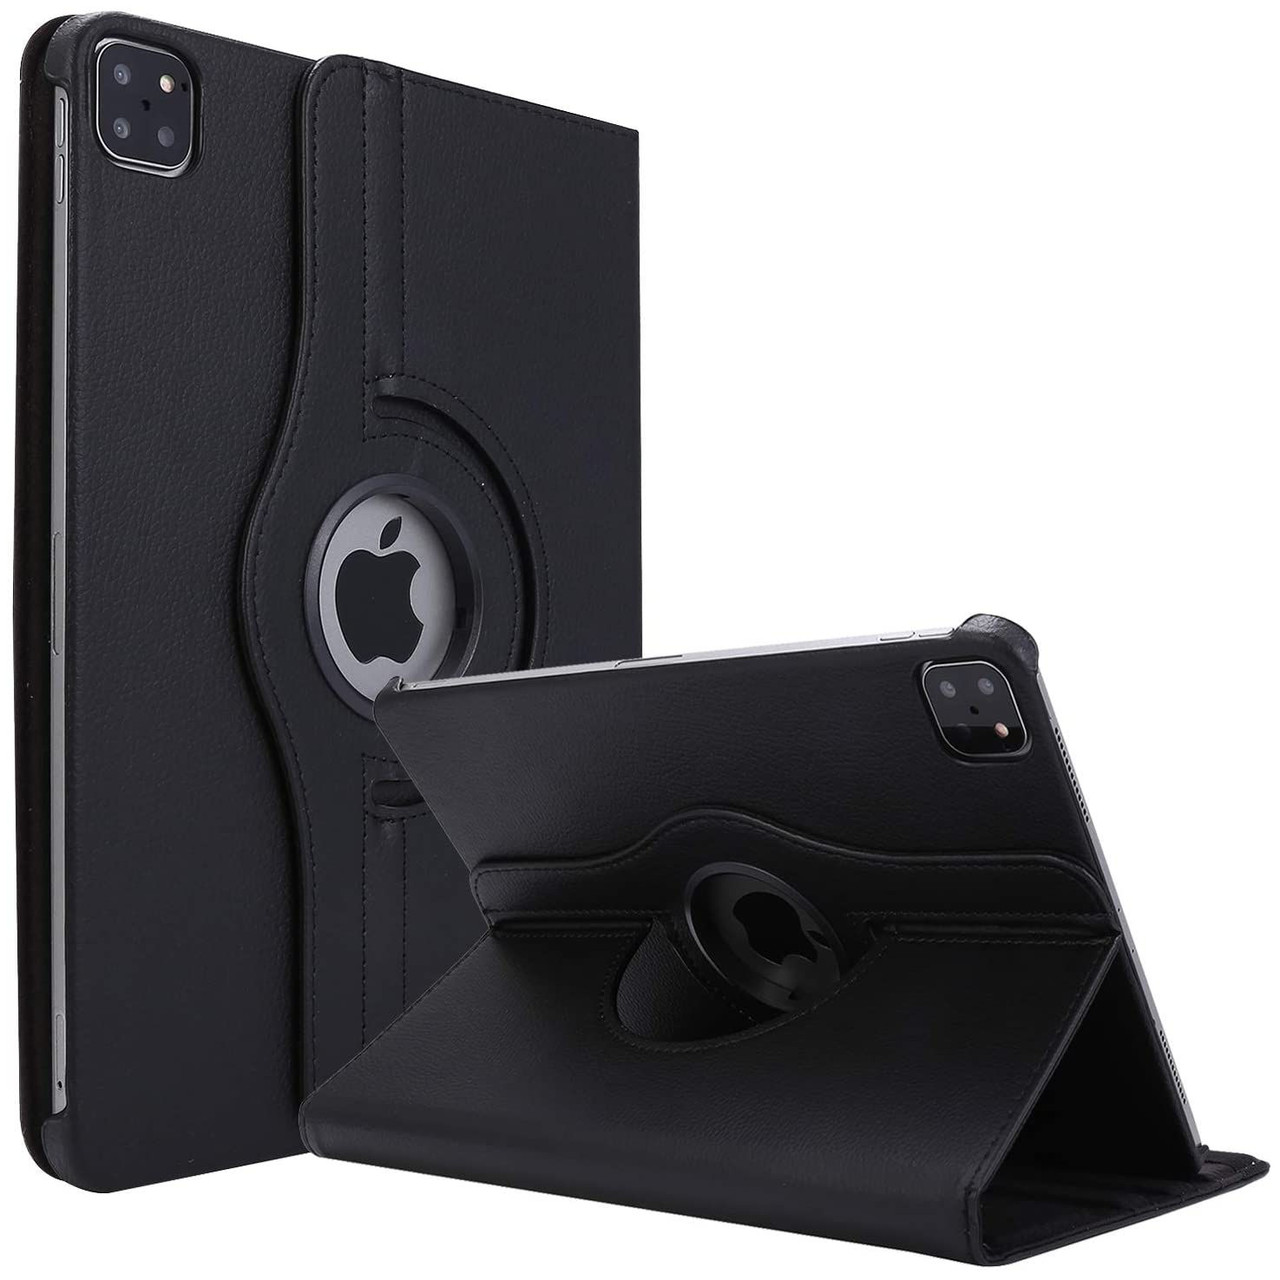 360 Smart Rotating Leather Case for iPad Pro 12.9 inch (3rd, 4th and 5th Generation) - Black - HD Accessory